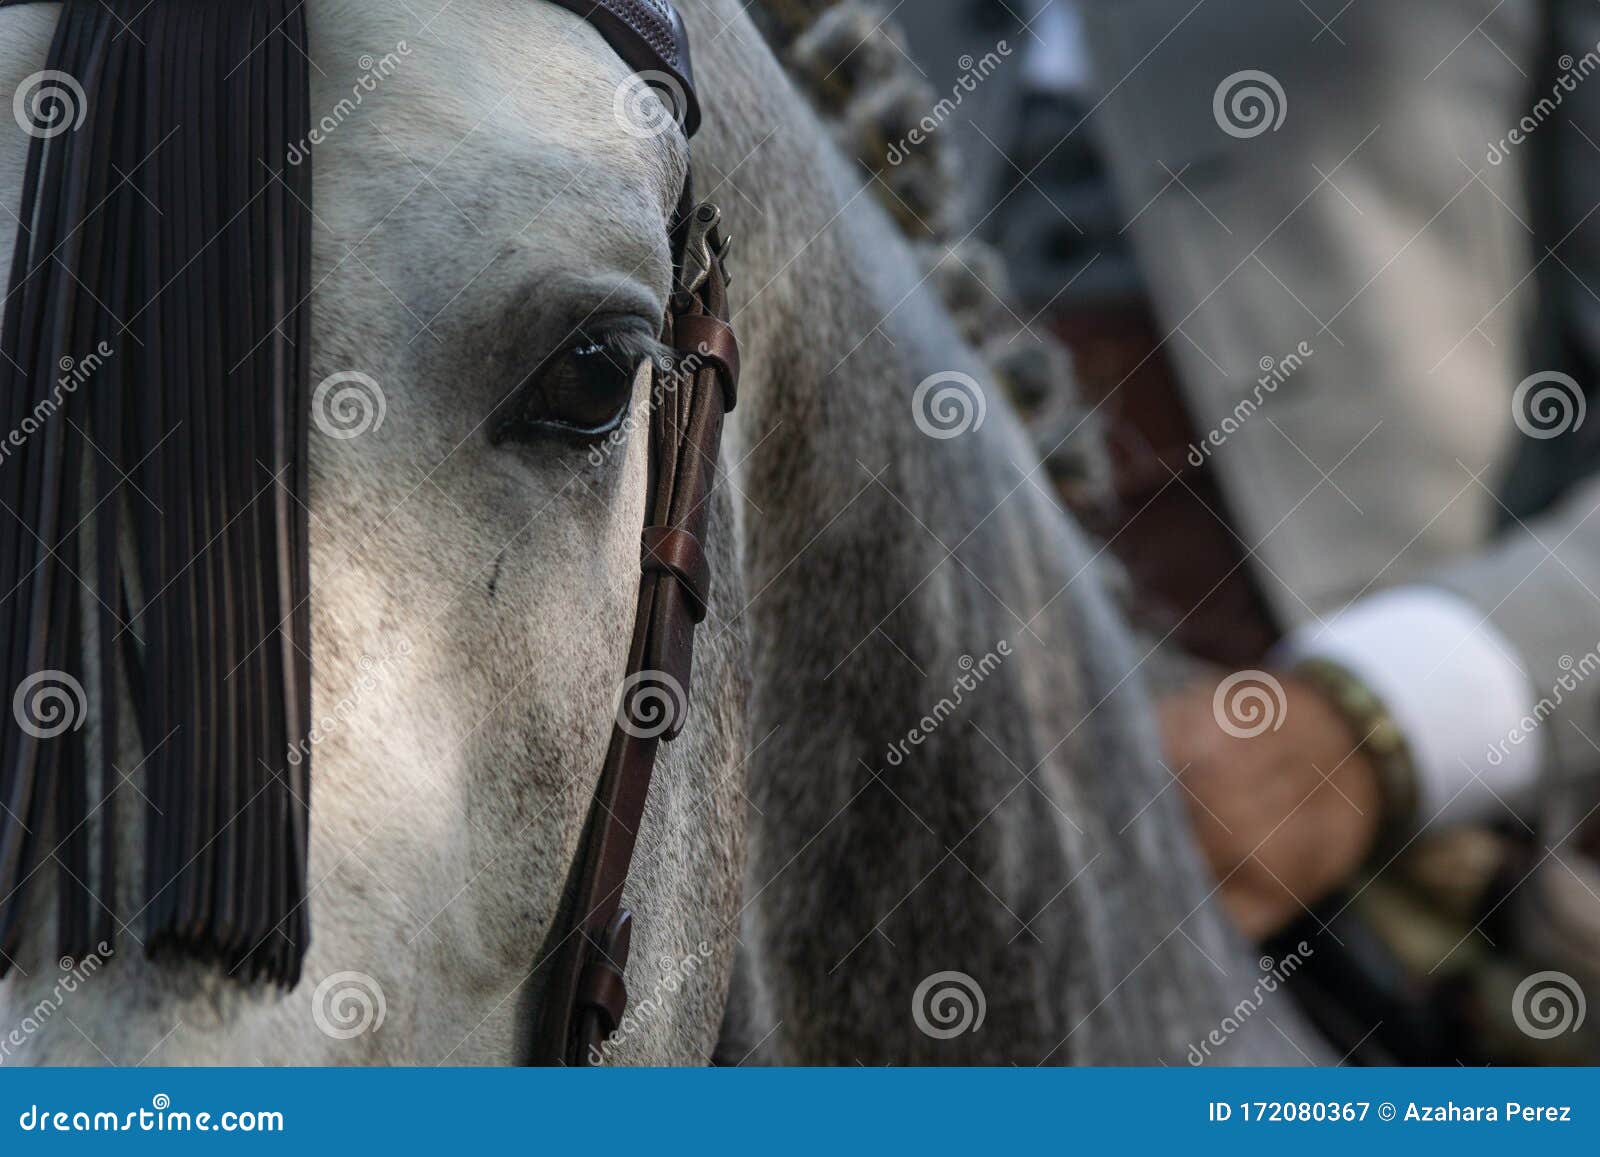 the eye of a spanish horse in doma vaquera